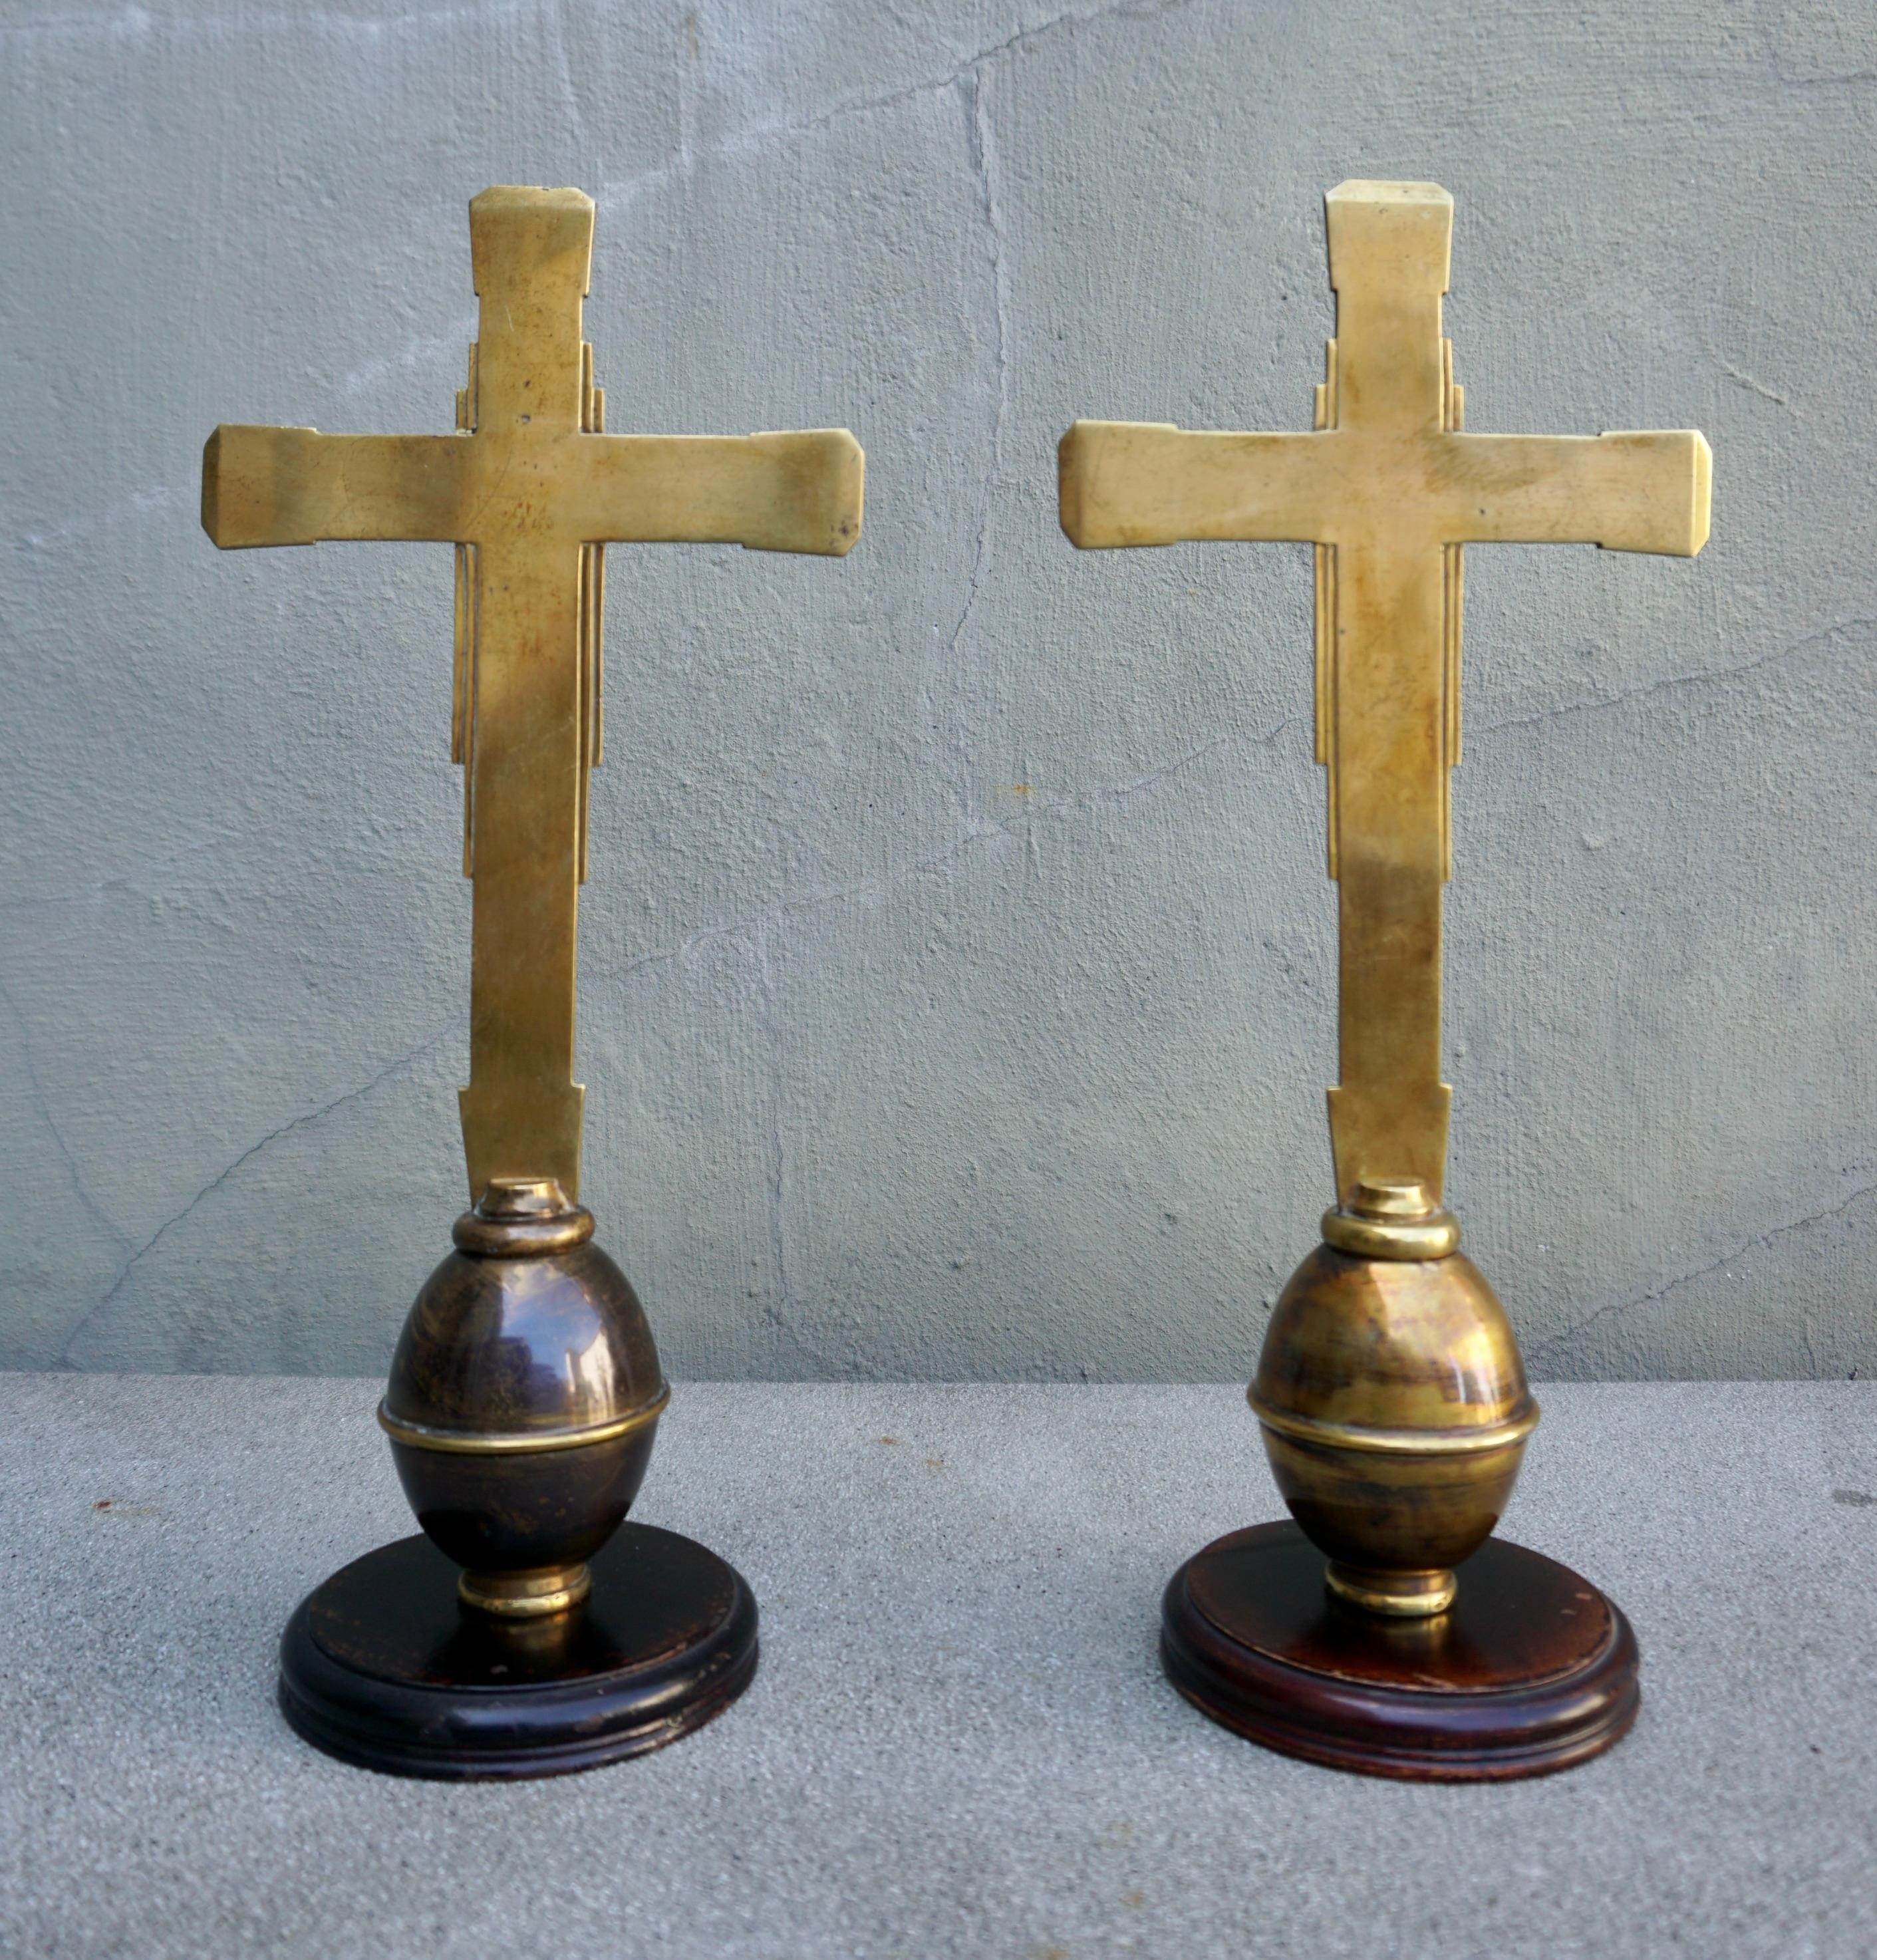 This holy cross is carried in a procession.
Brass cross ornament in great condition. The brass on this has great patina from age and use. The Cross has a strong stable base and this ornament may be used indoor or outdoor.

Height 15